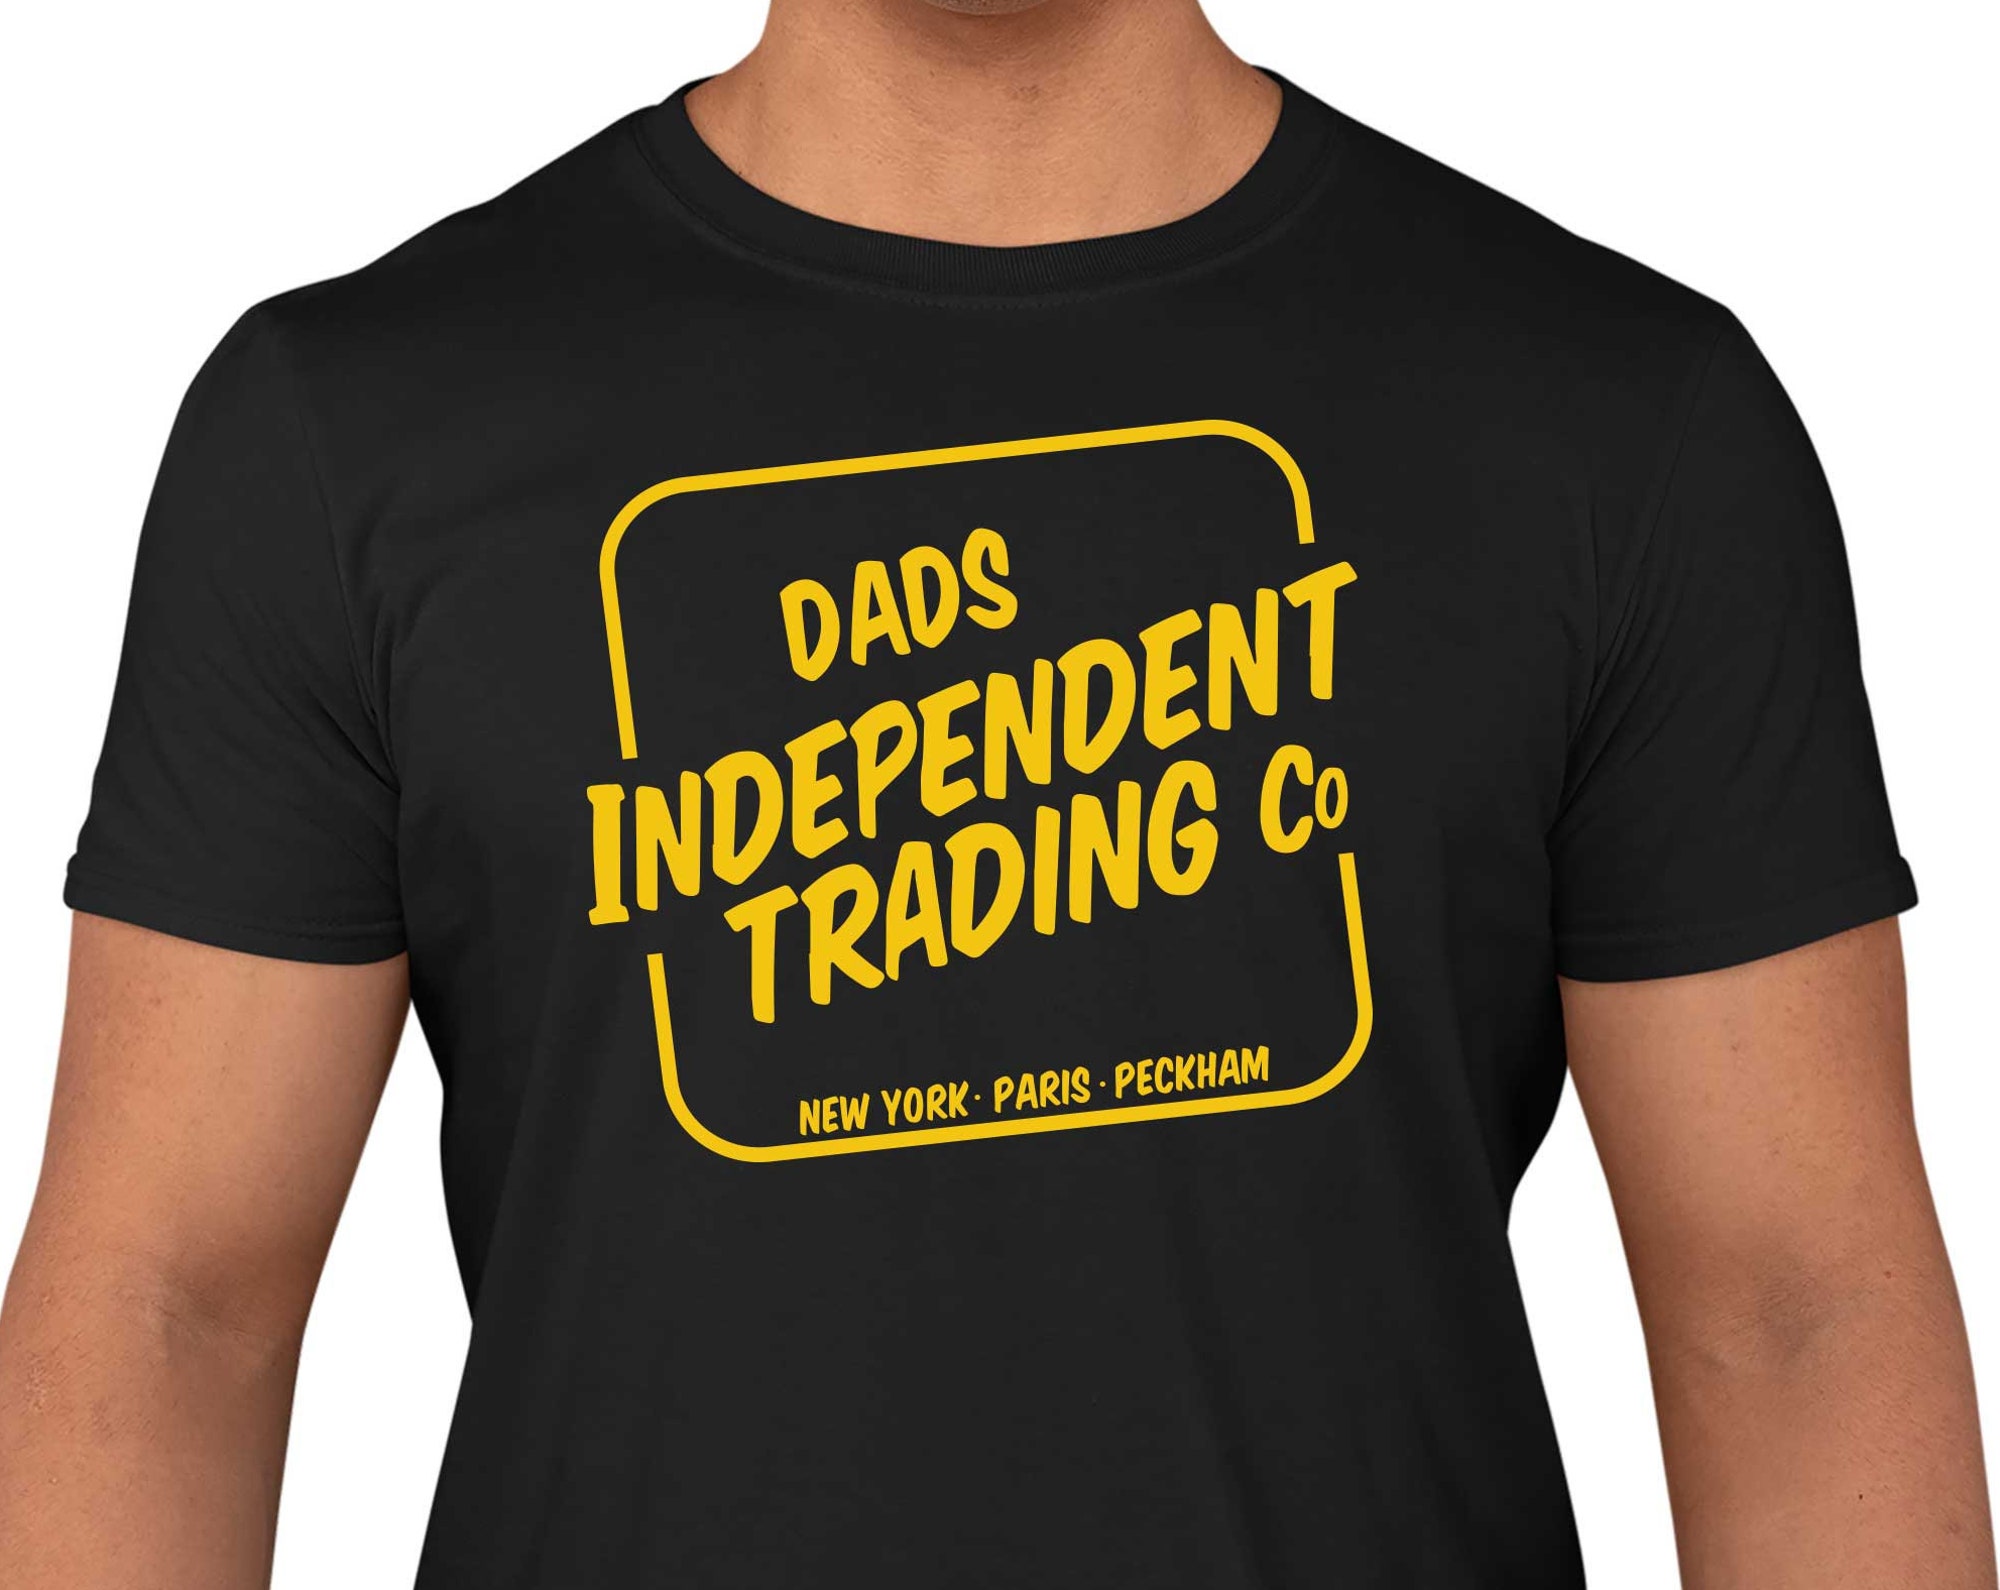 Dads Independent Trading Co Men's T-Shirt